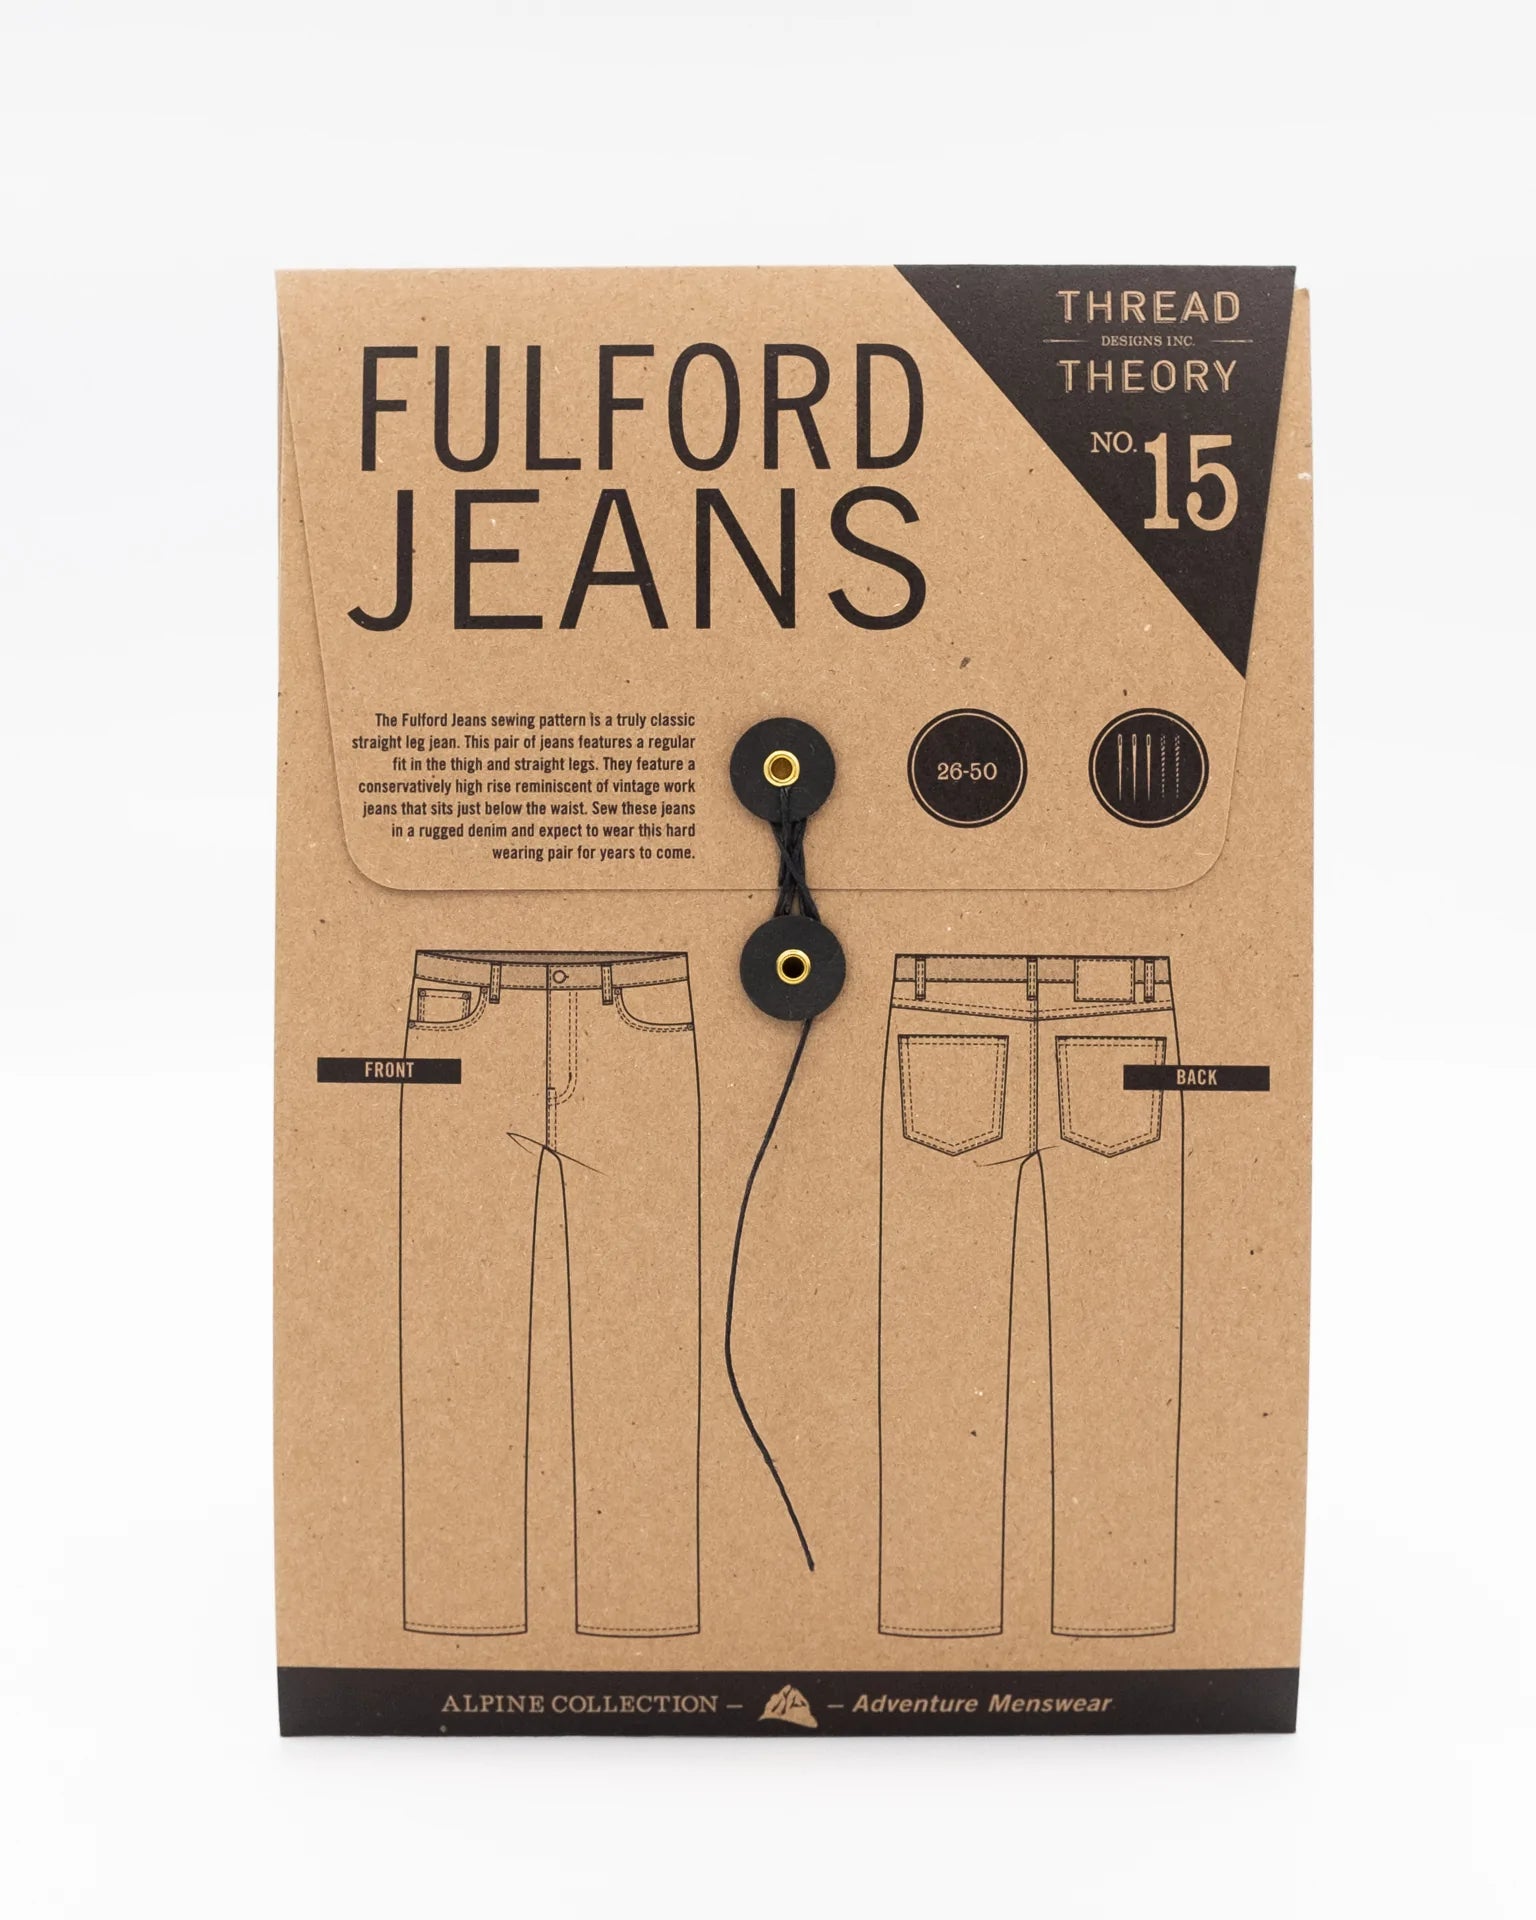 Thread Theory No 15 Fulford Jeans (Trousers)